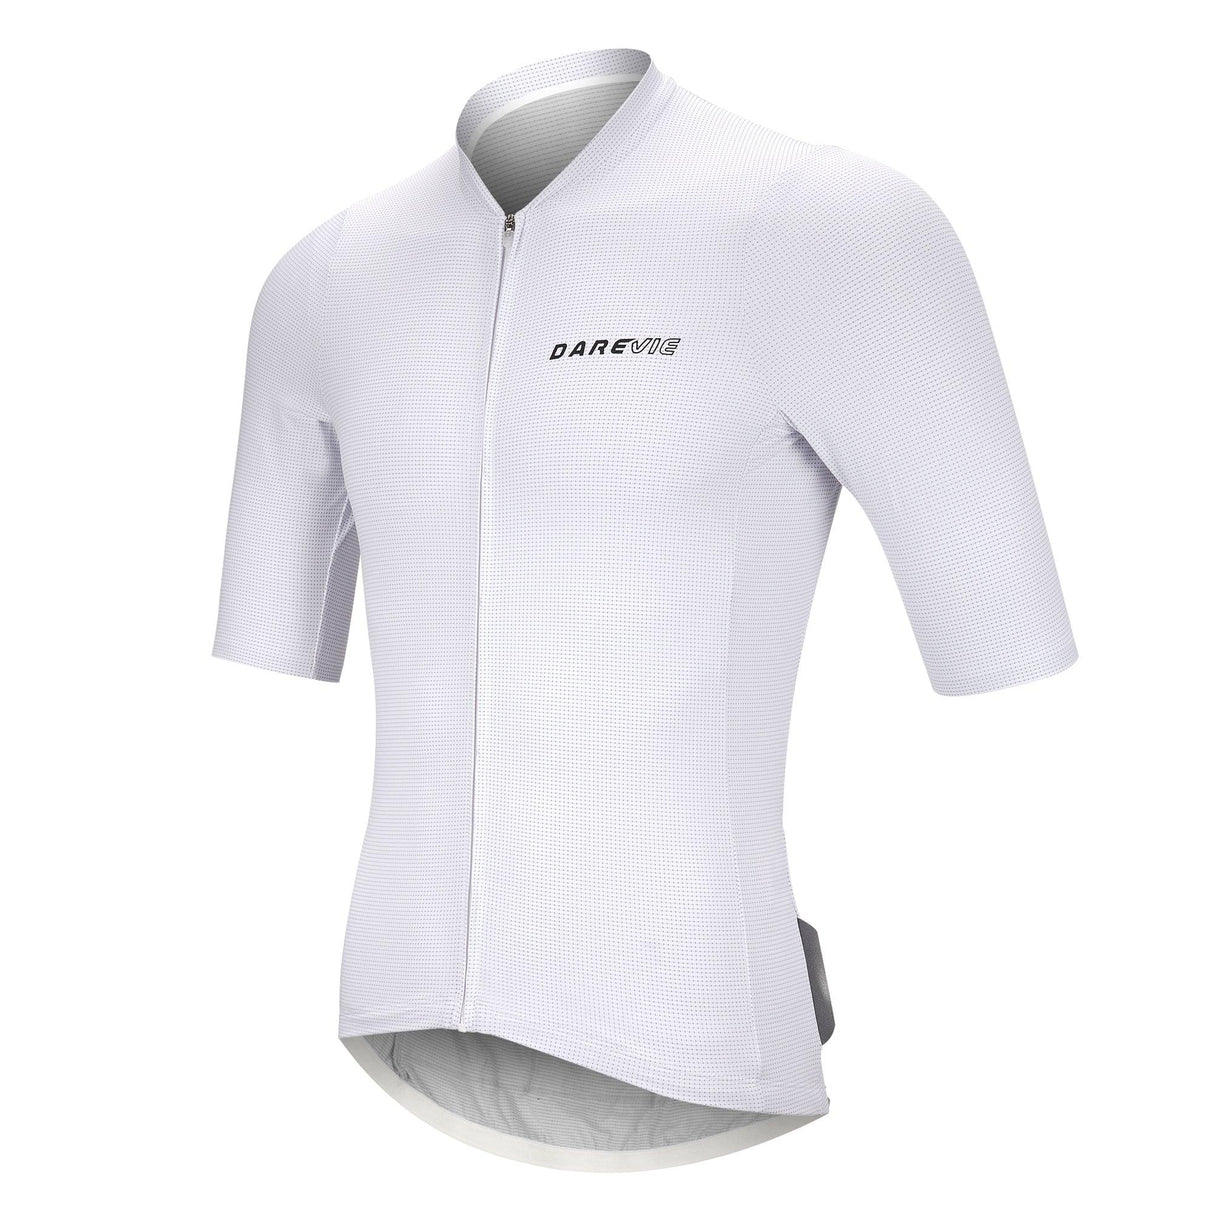 CARBON CYCLING JERSEY-White-Side-Darevie Shop